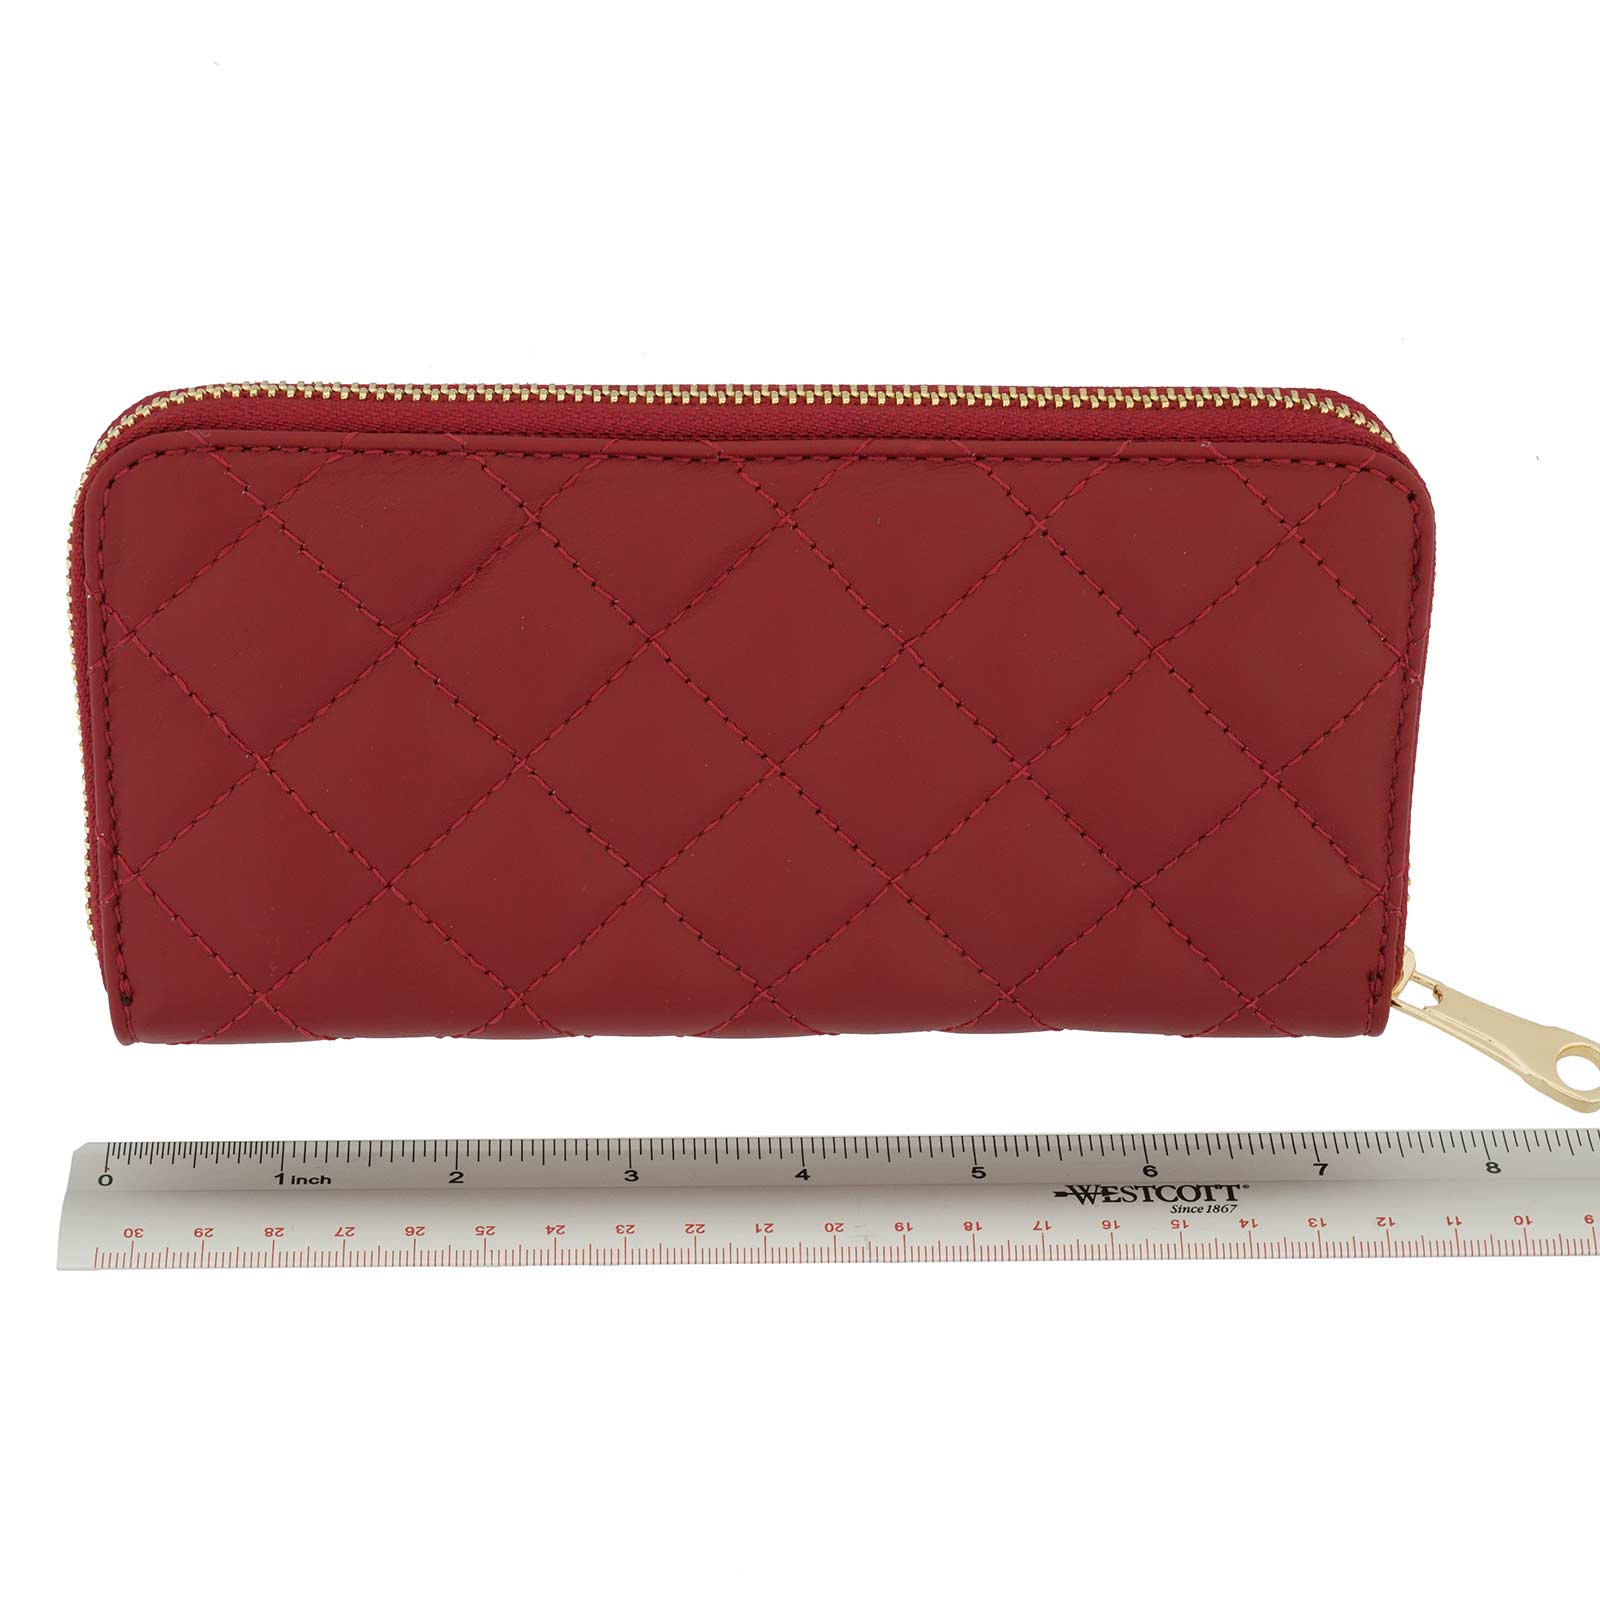 Fioretta Italian Genuine Leather Quilted Wallet For Women Credit Card Organizer - Red